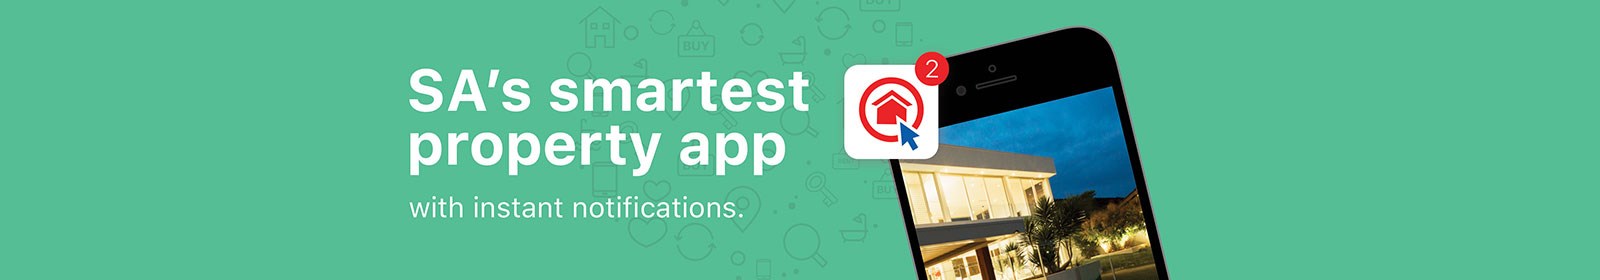 3 reasons to download South Africa’s smartest property app 